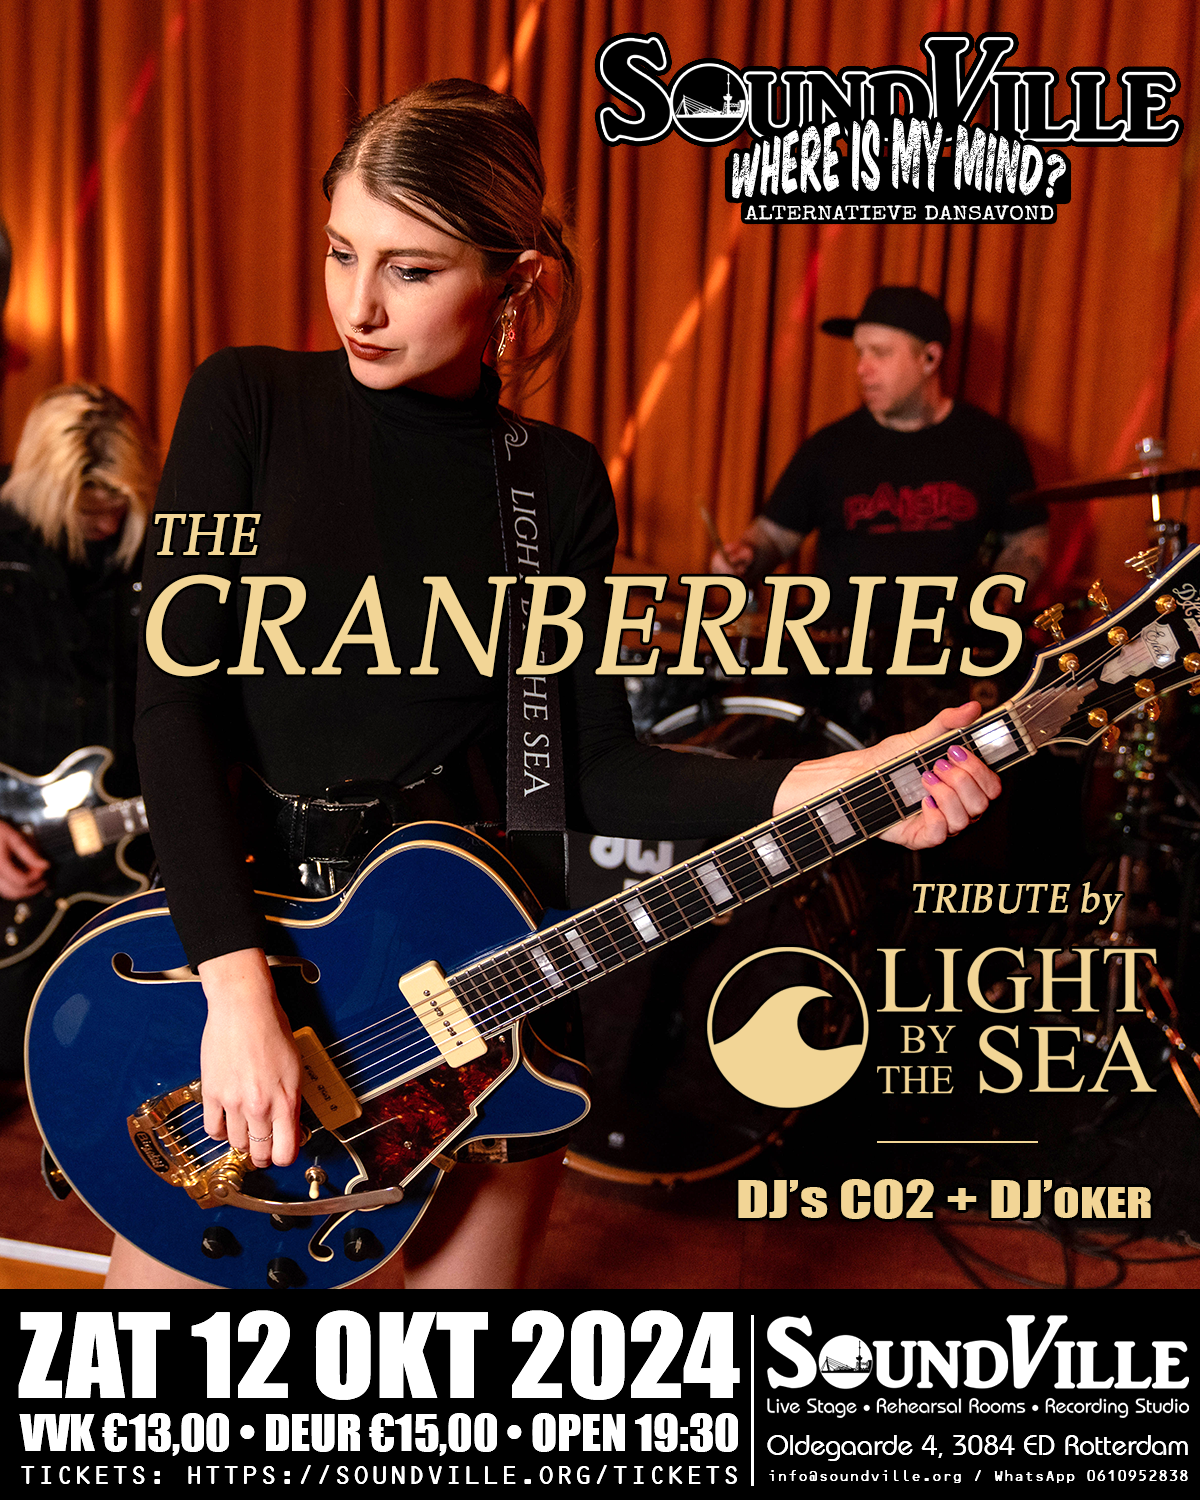 LIGHT BY THE SEA plays CRANBERRIES